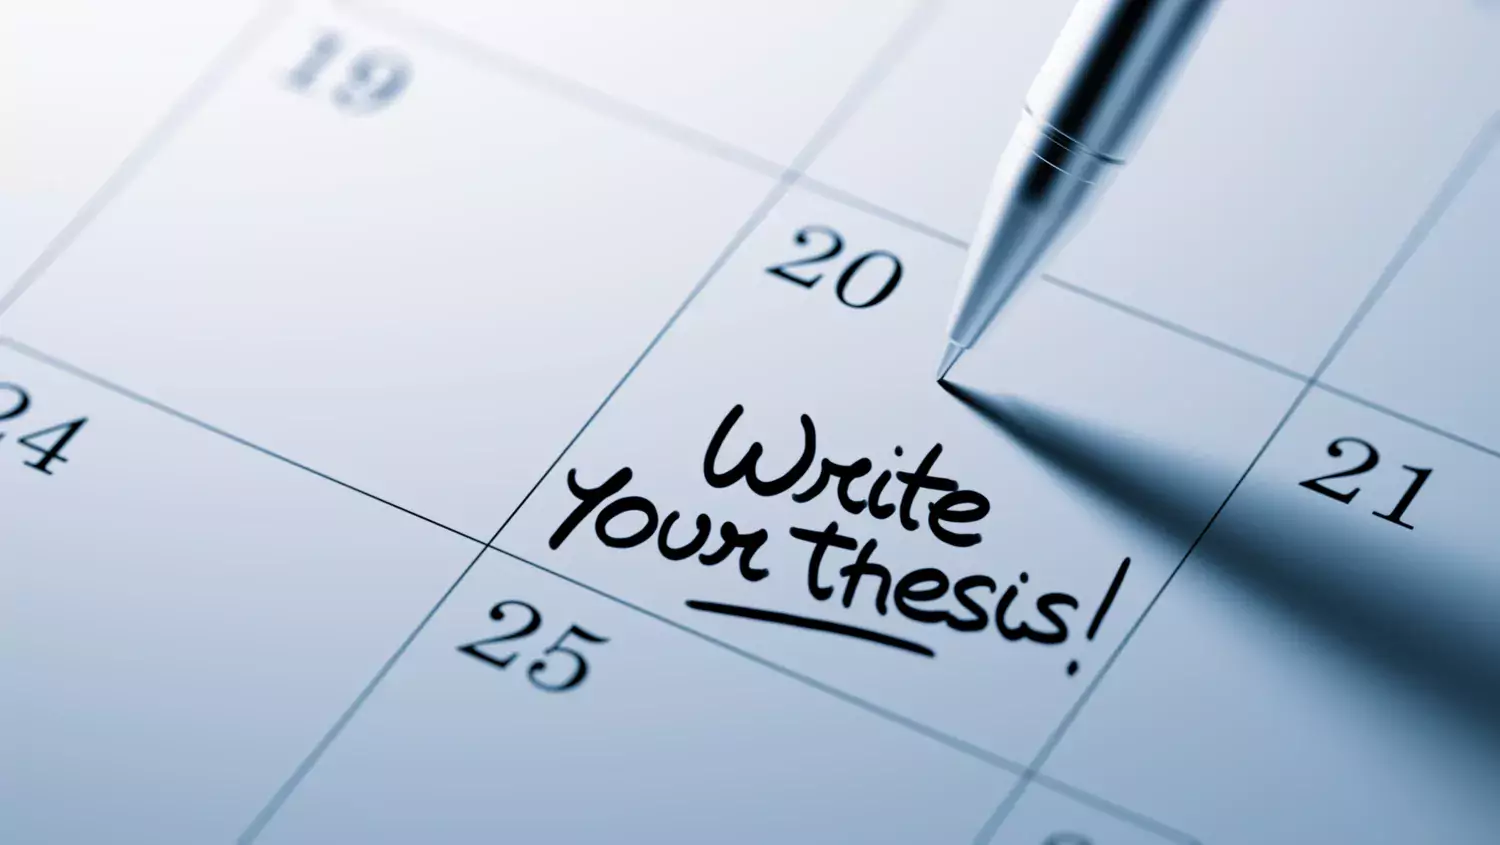 note in a desk calendar that says "write your thesis" on it